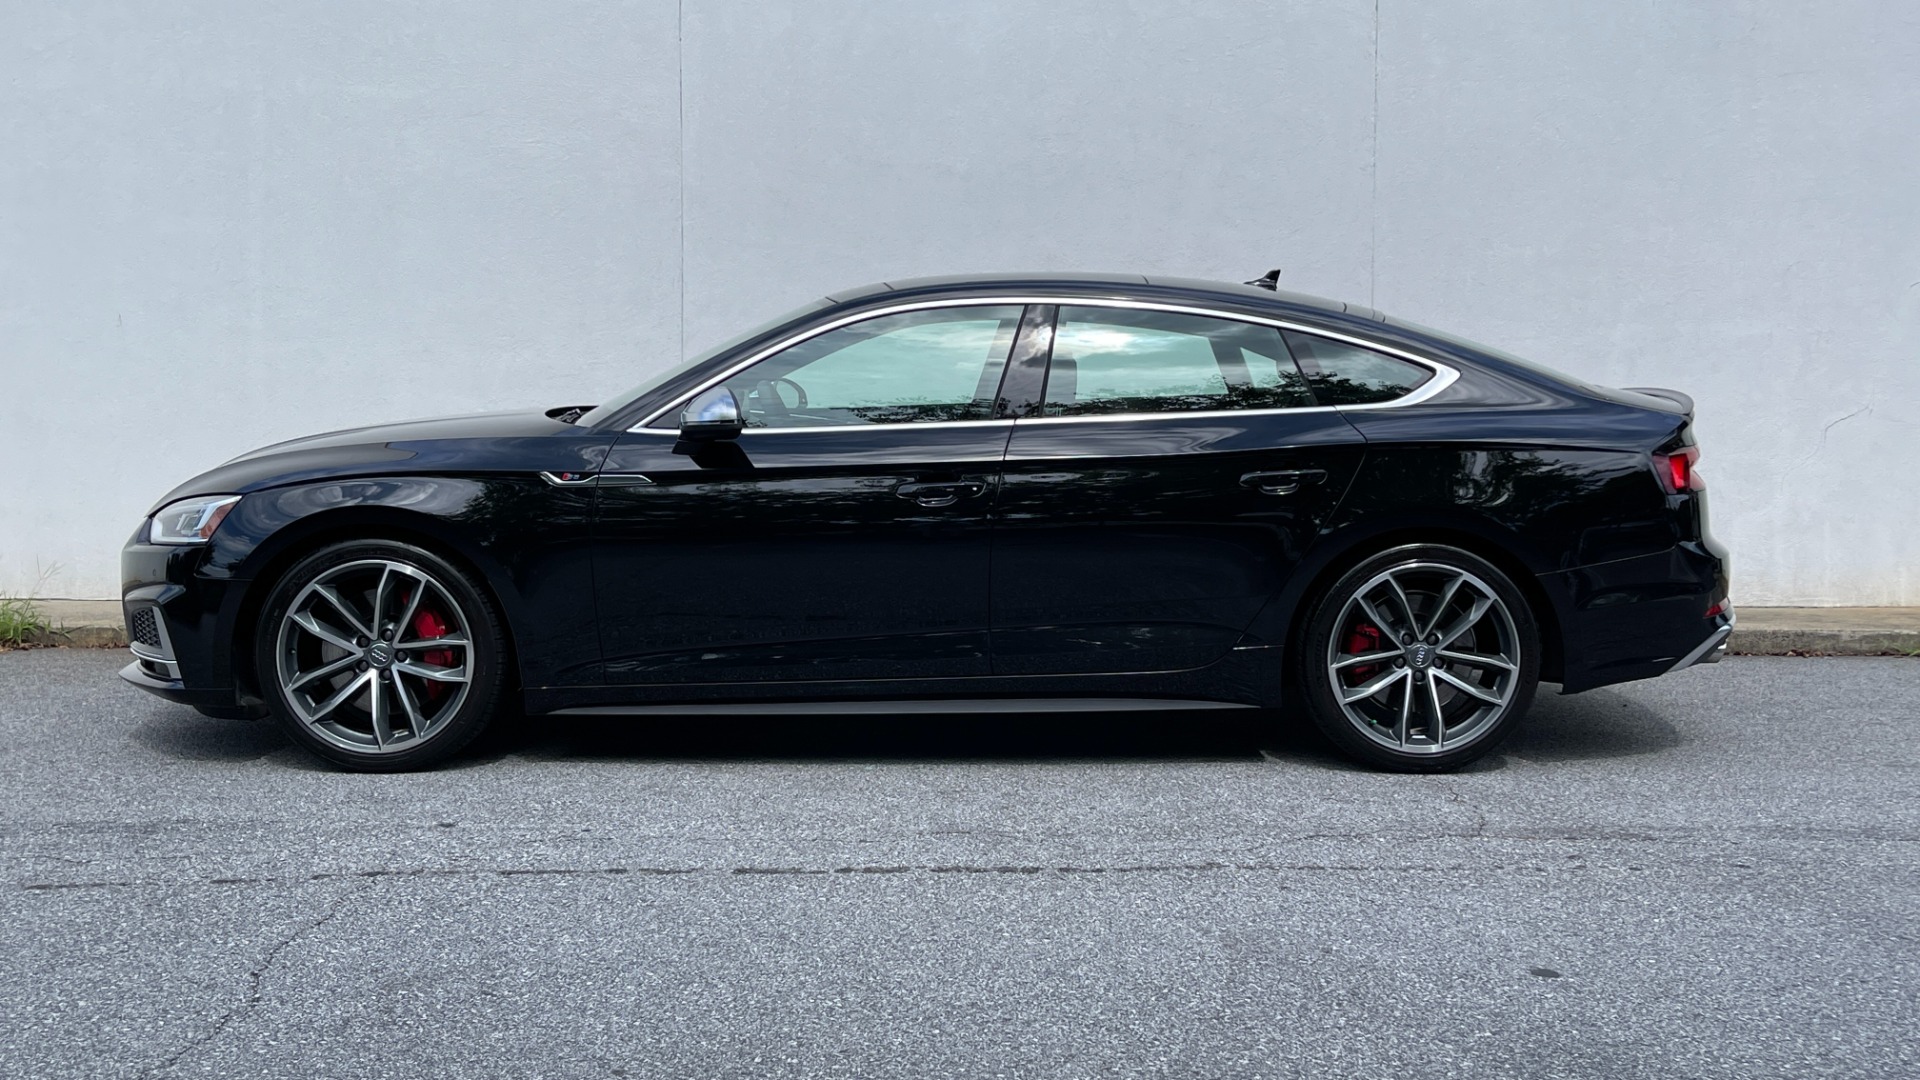 Used 2018 Audi S5 Sportback PRESTIGE / WARM WEATHER / S SPORT / 19IN WHEELS for sale $47,995 at Formula Imports in Charlotte NC 28227 6